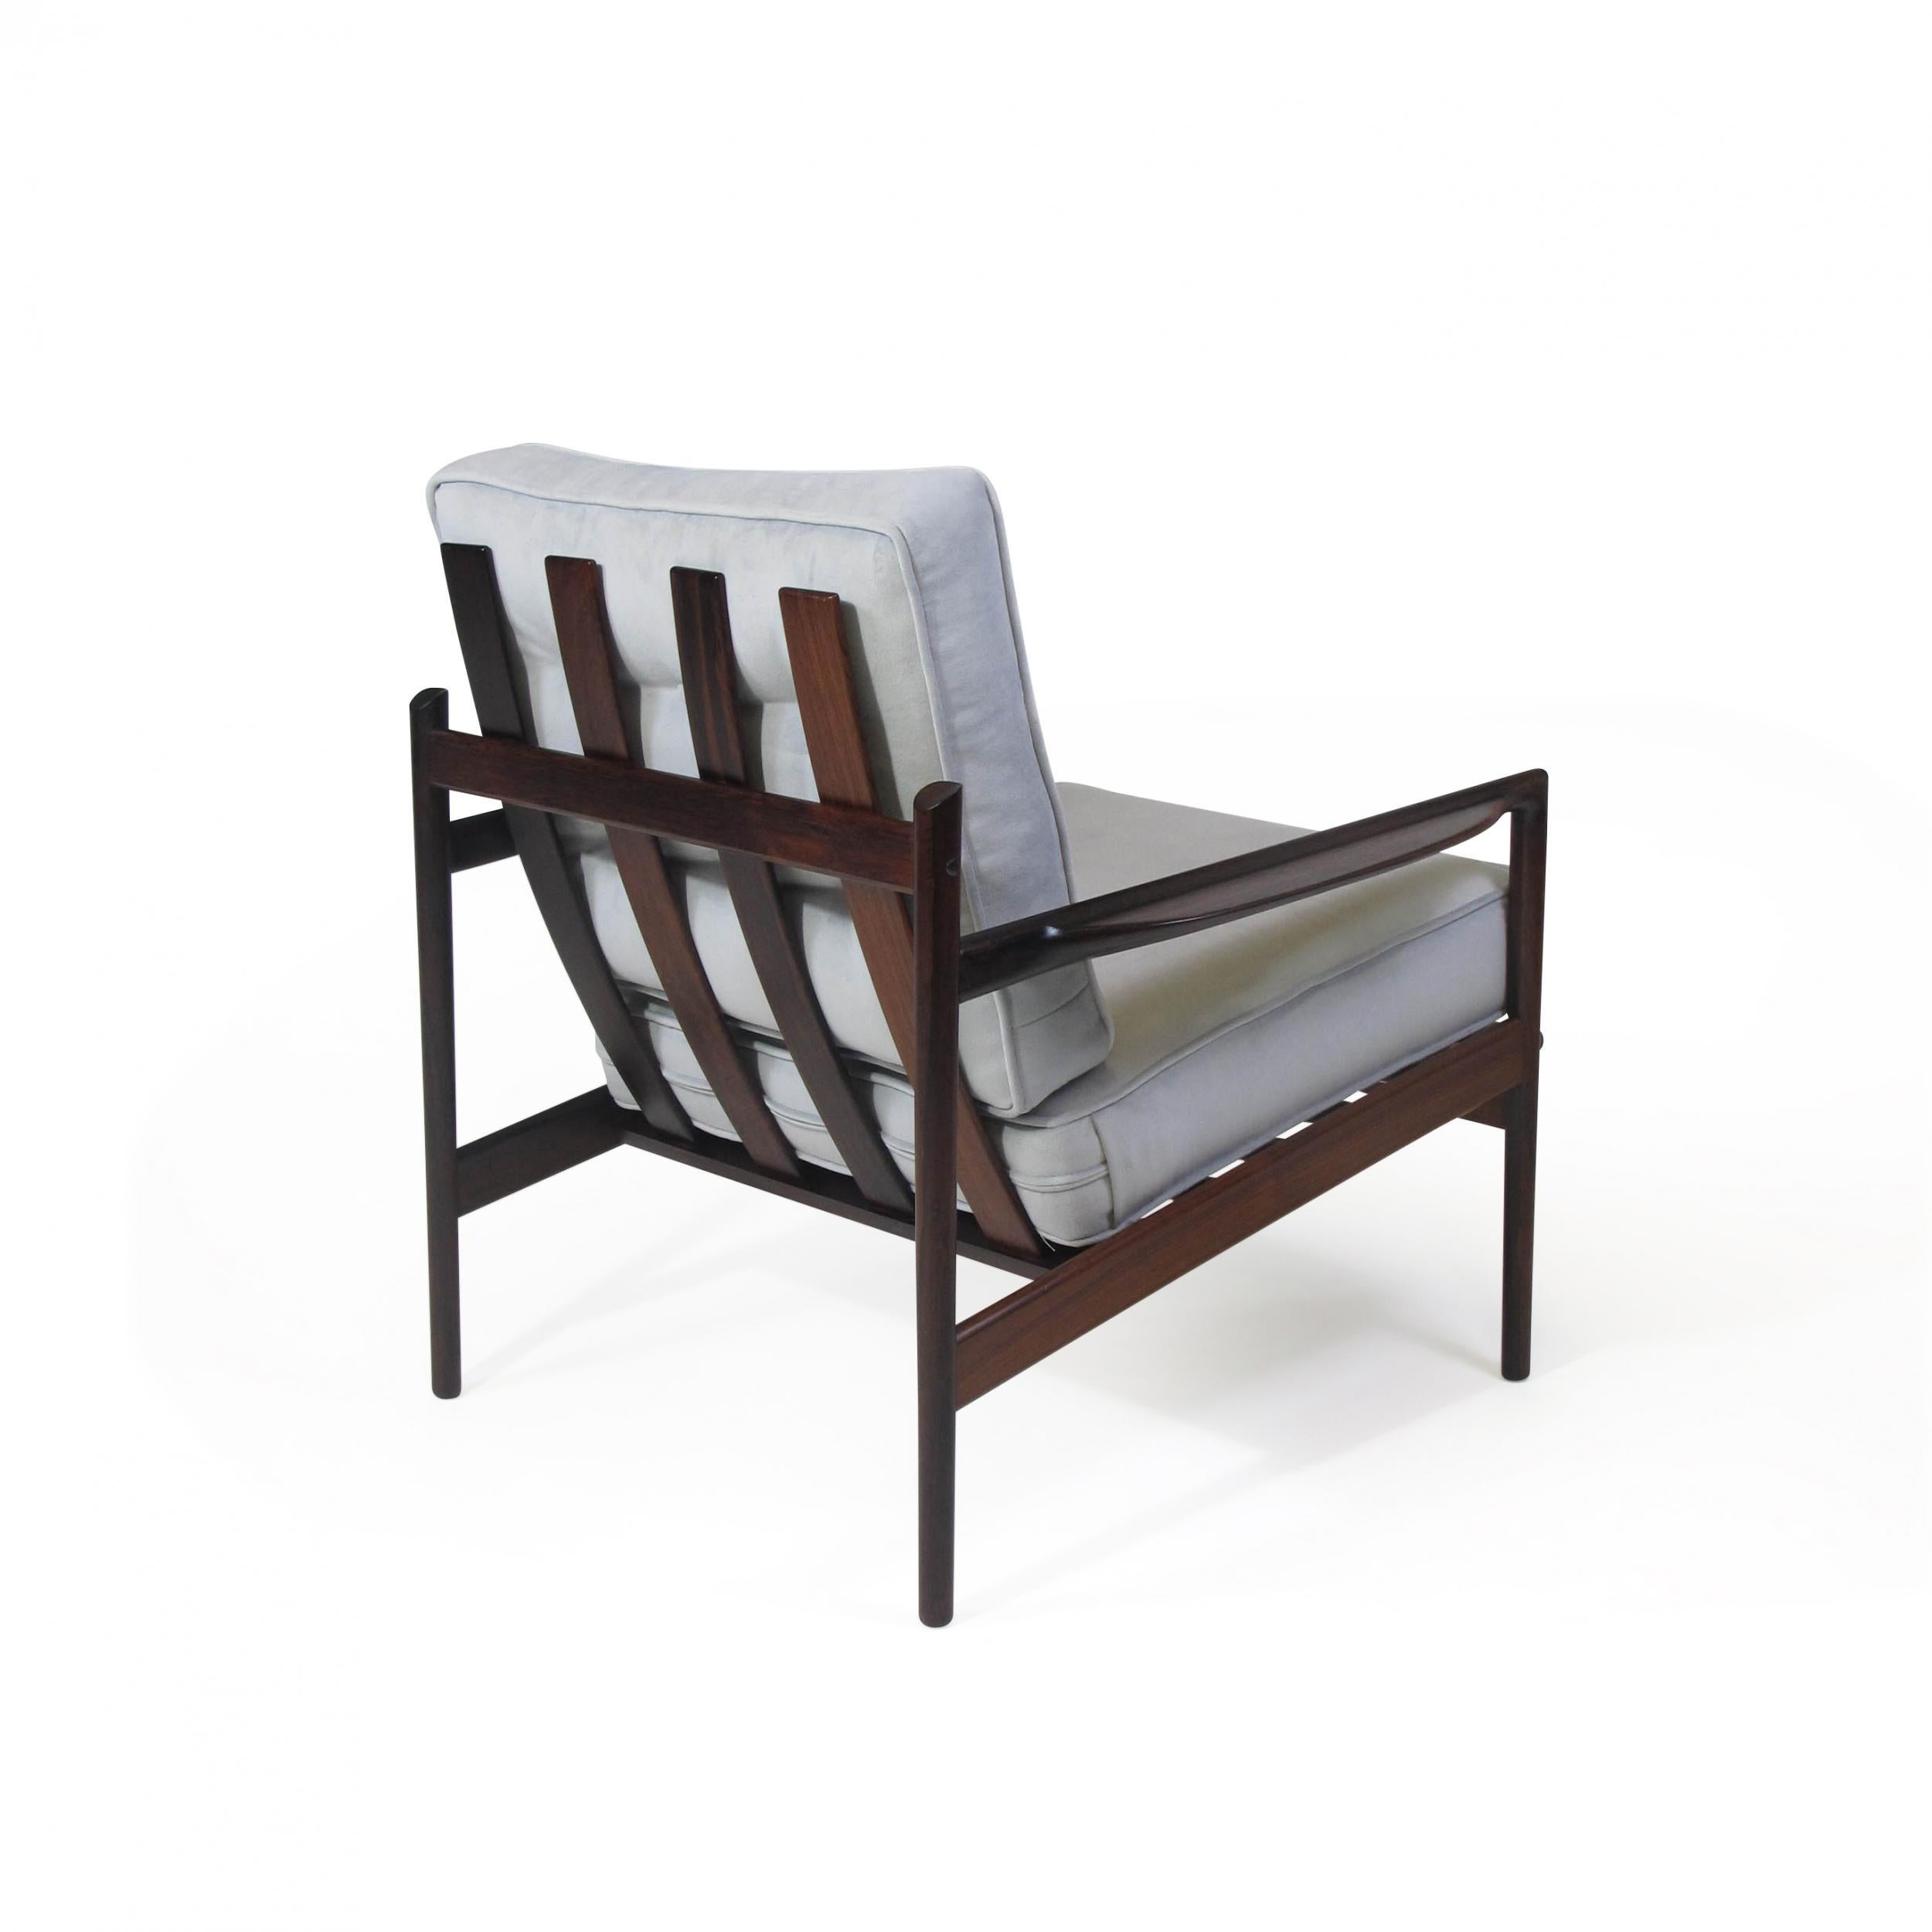 Pair of Mid Century Brazilian Rosewood lounge designed by IB Kofoed Larsen for Selig. Each lounge chair is crafted of solid Brazilian rosewood with rich dynamic-grain, sculpted armrests, slatted backrest, with loose cushions upholstered in a soft